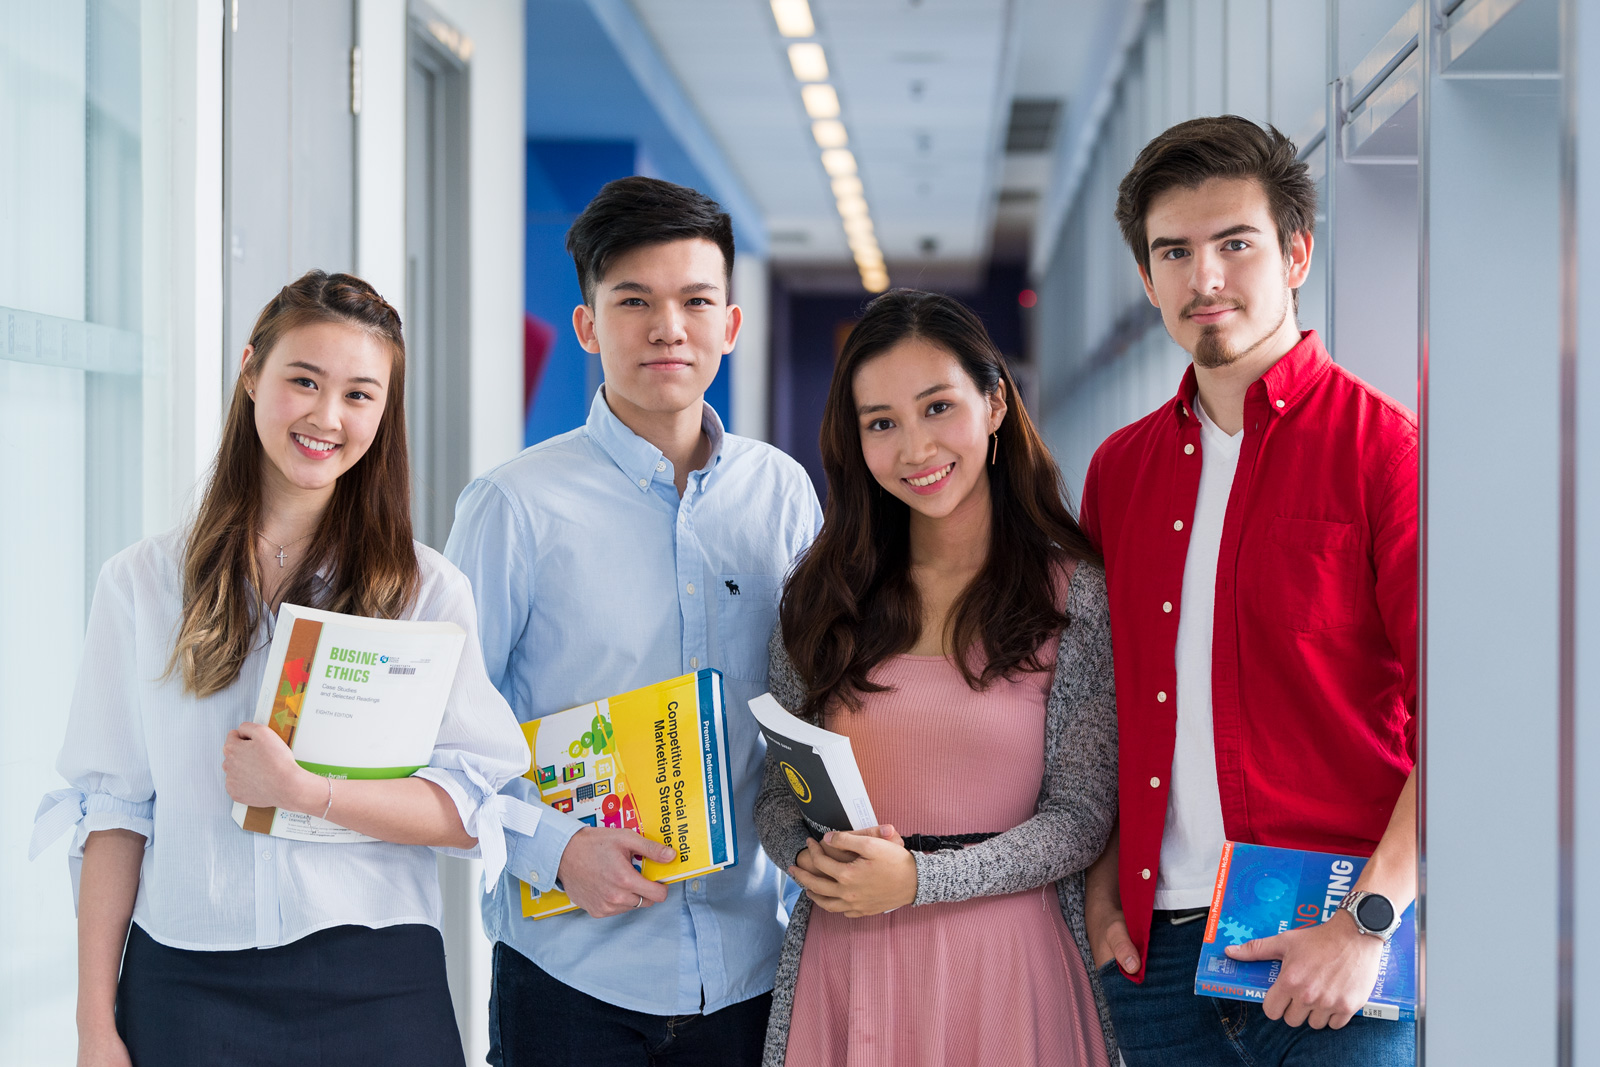 The unique CityU Talents Programme allows brilliant young students to benefit from the University’s highly interdisciplinary, technology-enriched courses 